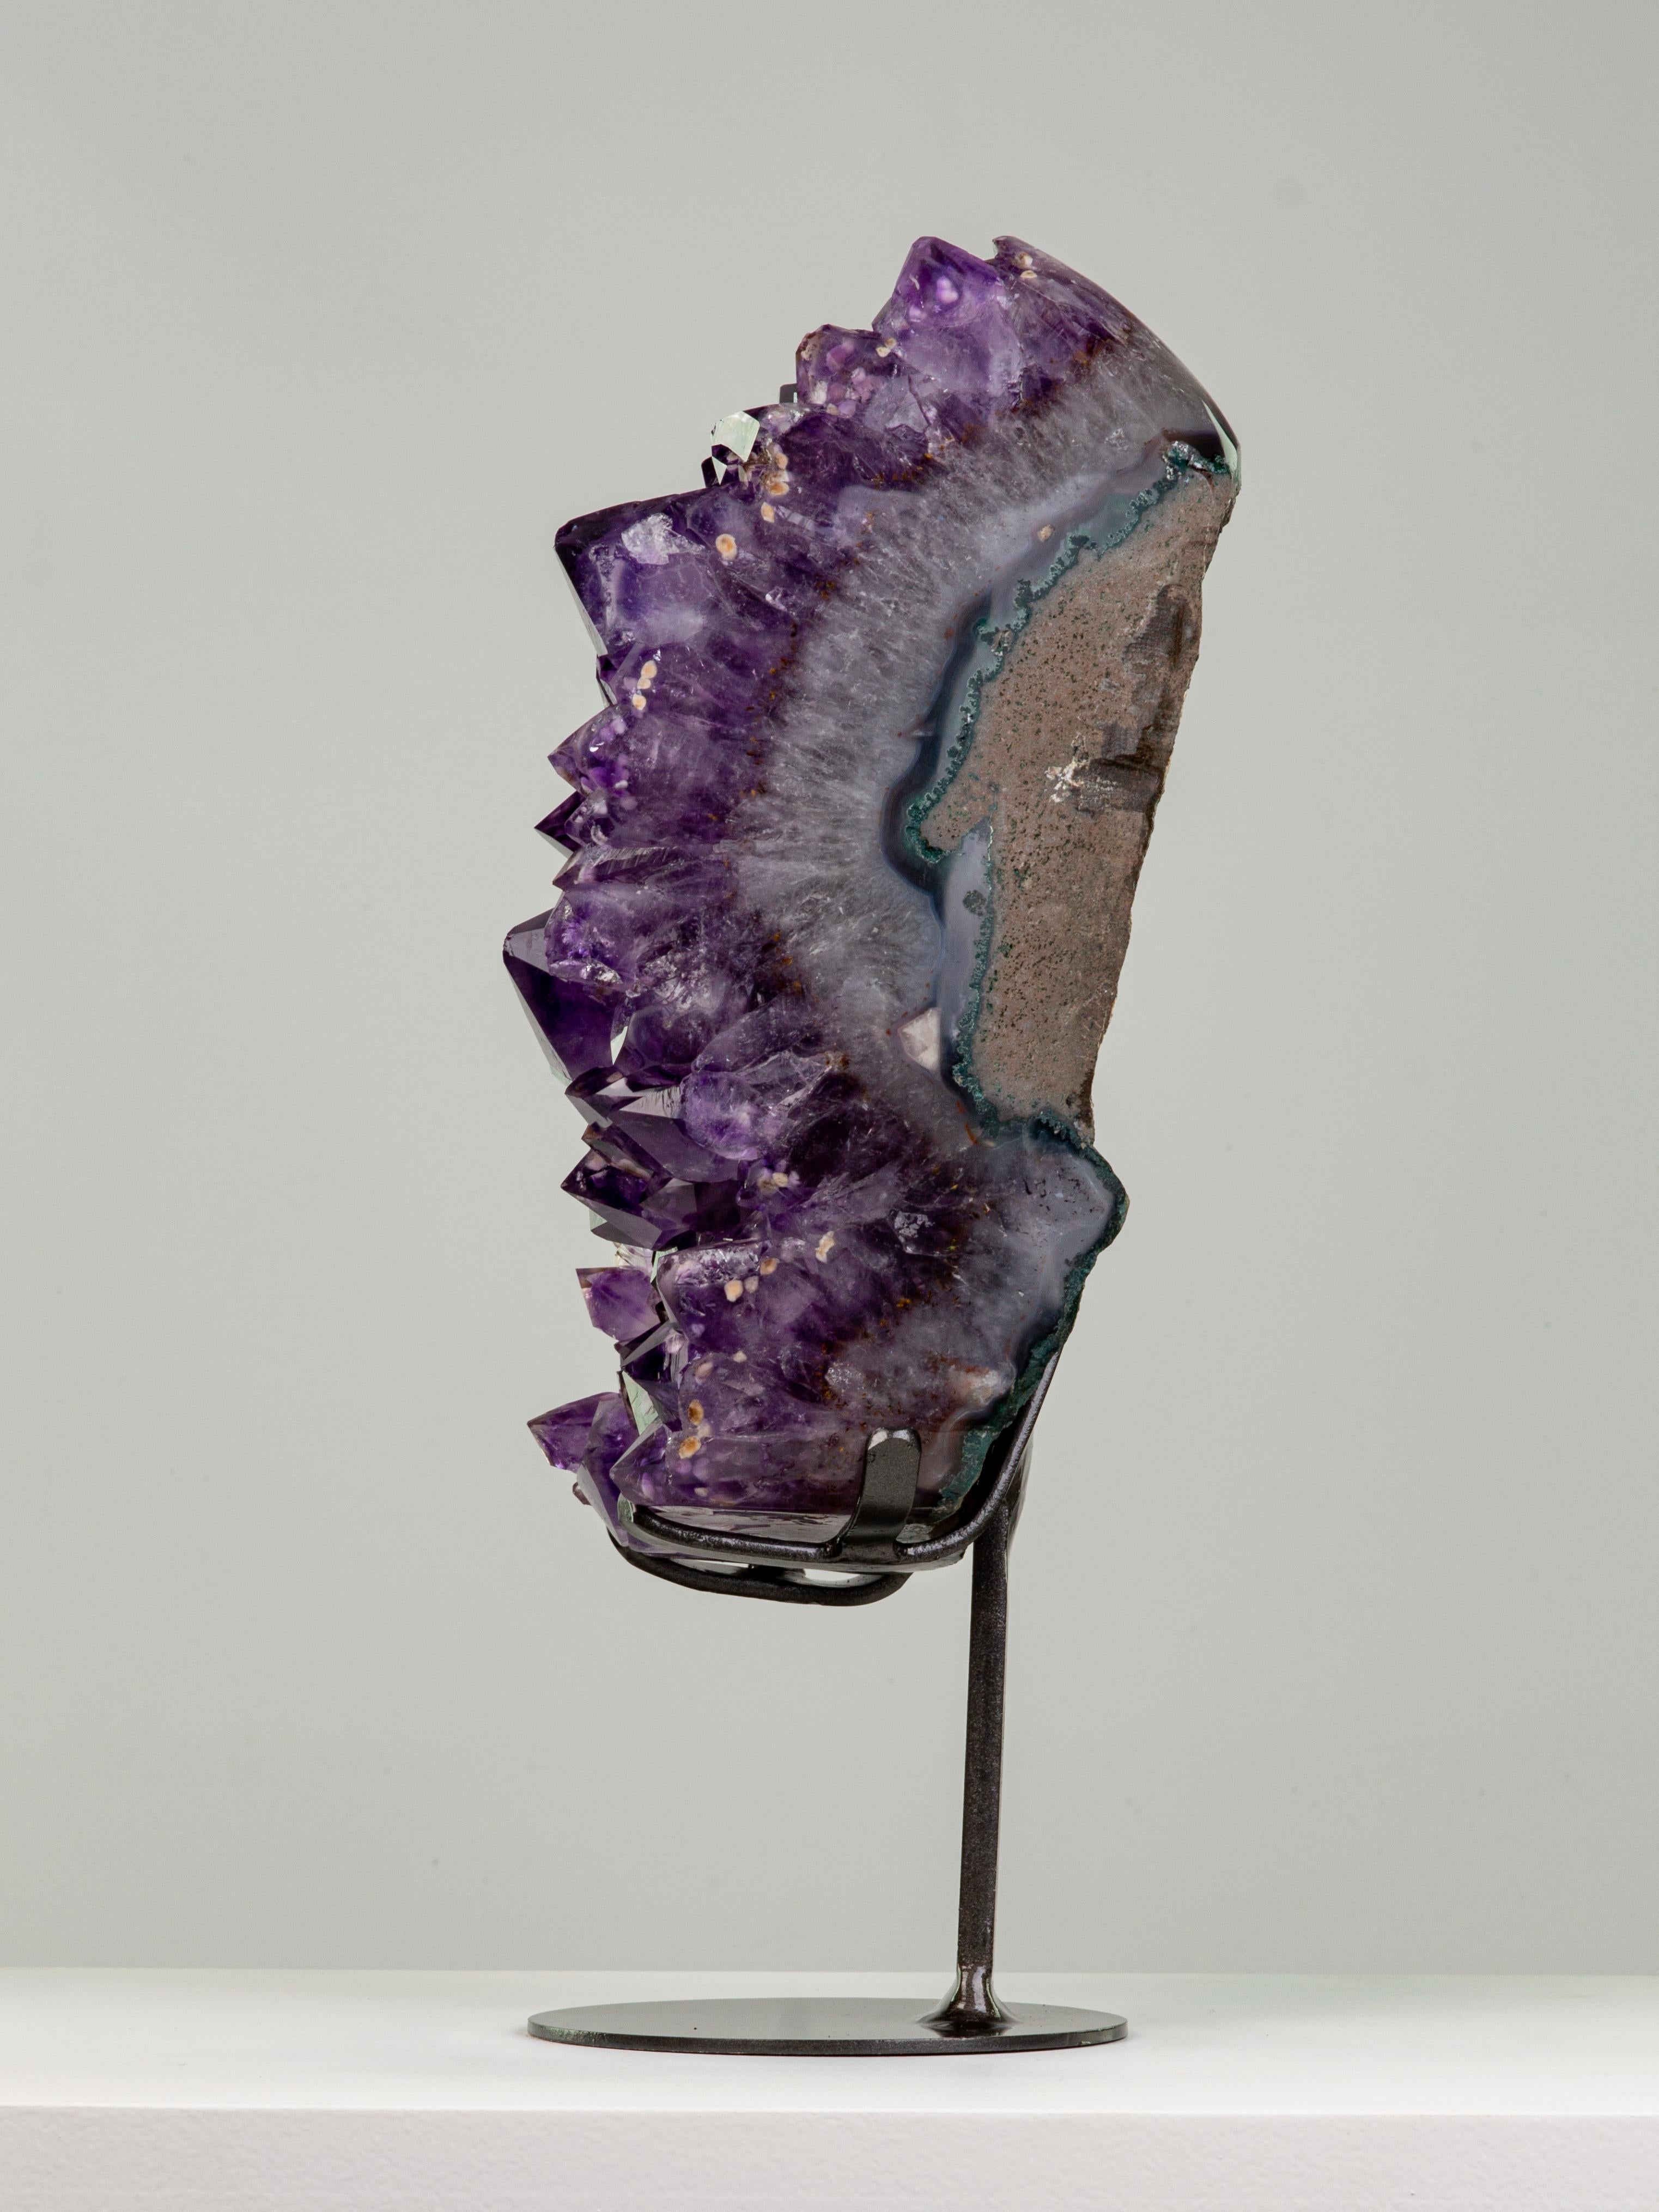 amethyst with goethite inclusions